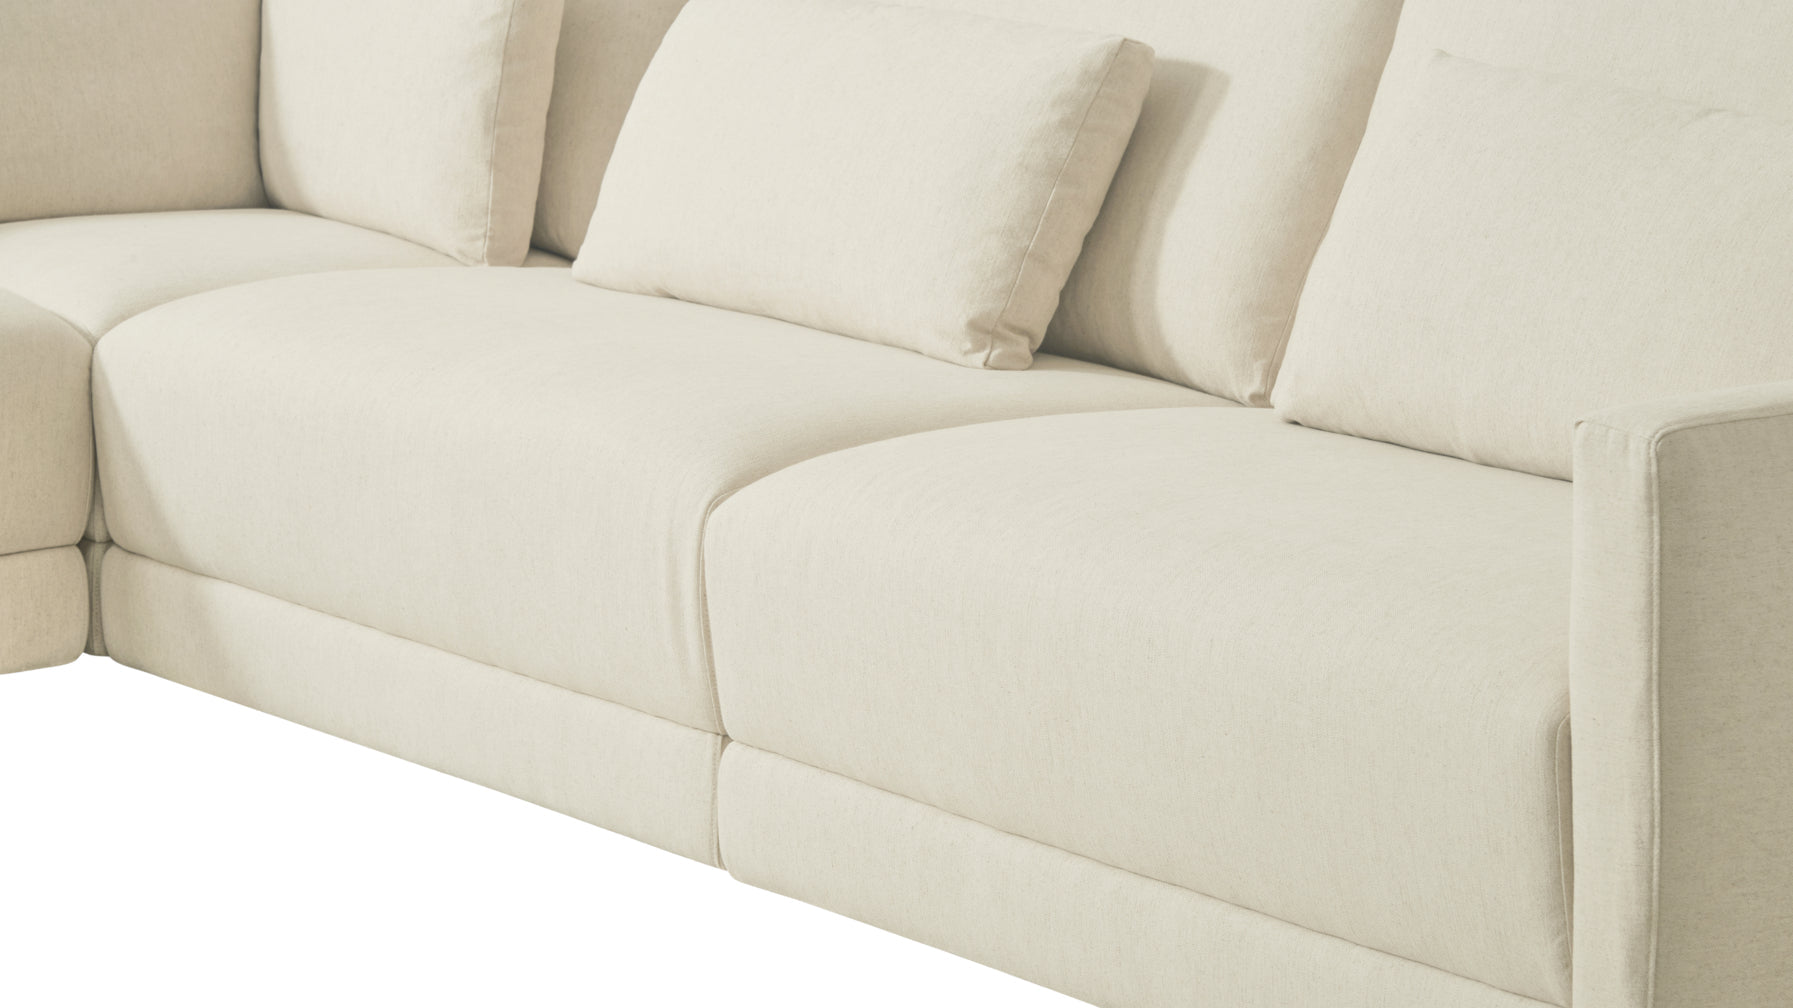 Wind Down 5-Piece Modular Sectional Closed, Beach - Image 7